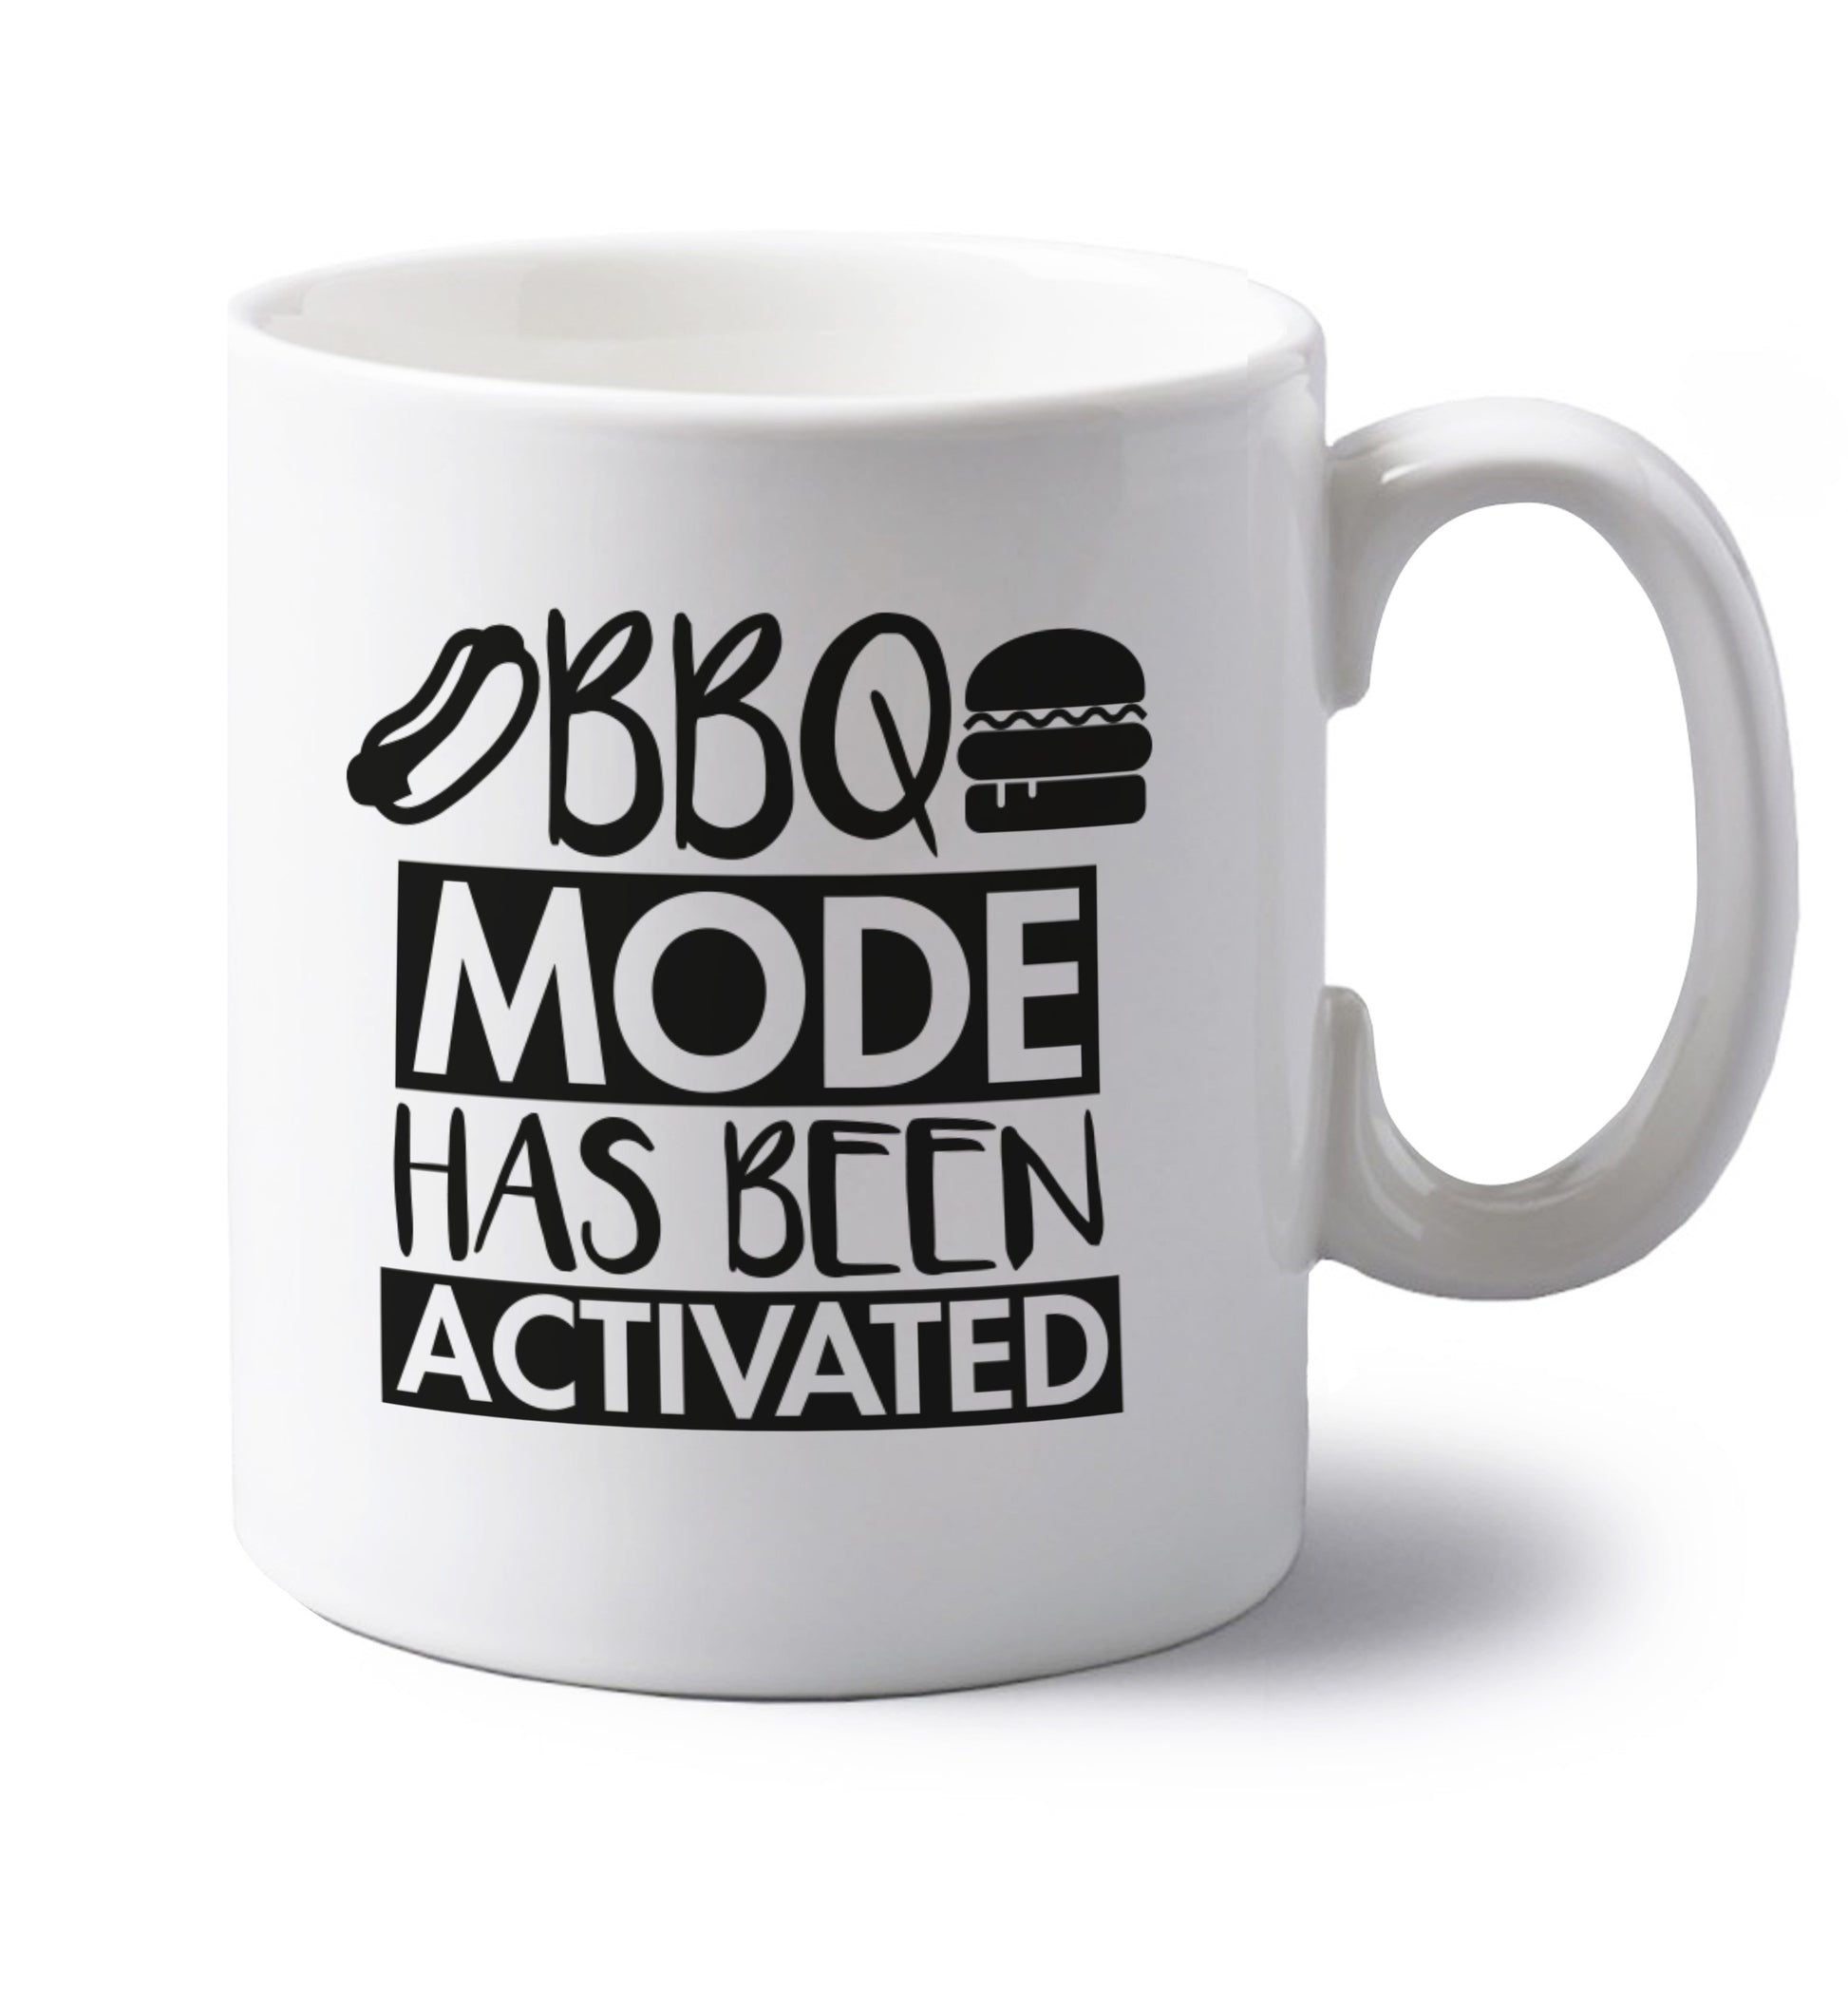 Bbq mode has been activated left handed white ceramic mug 